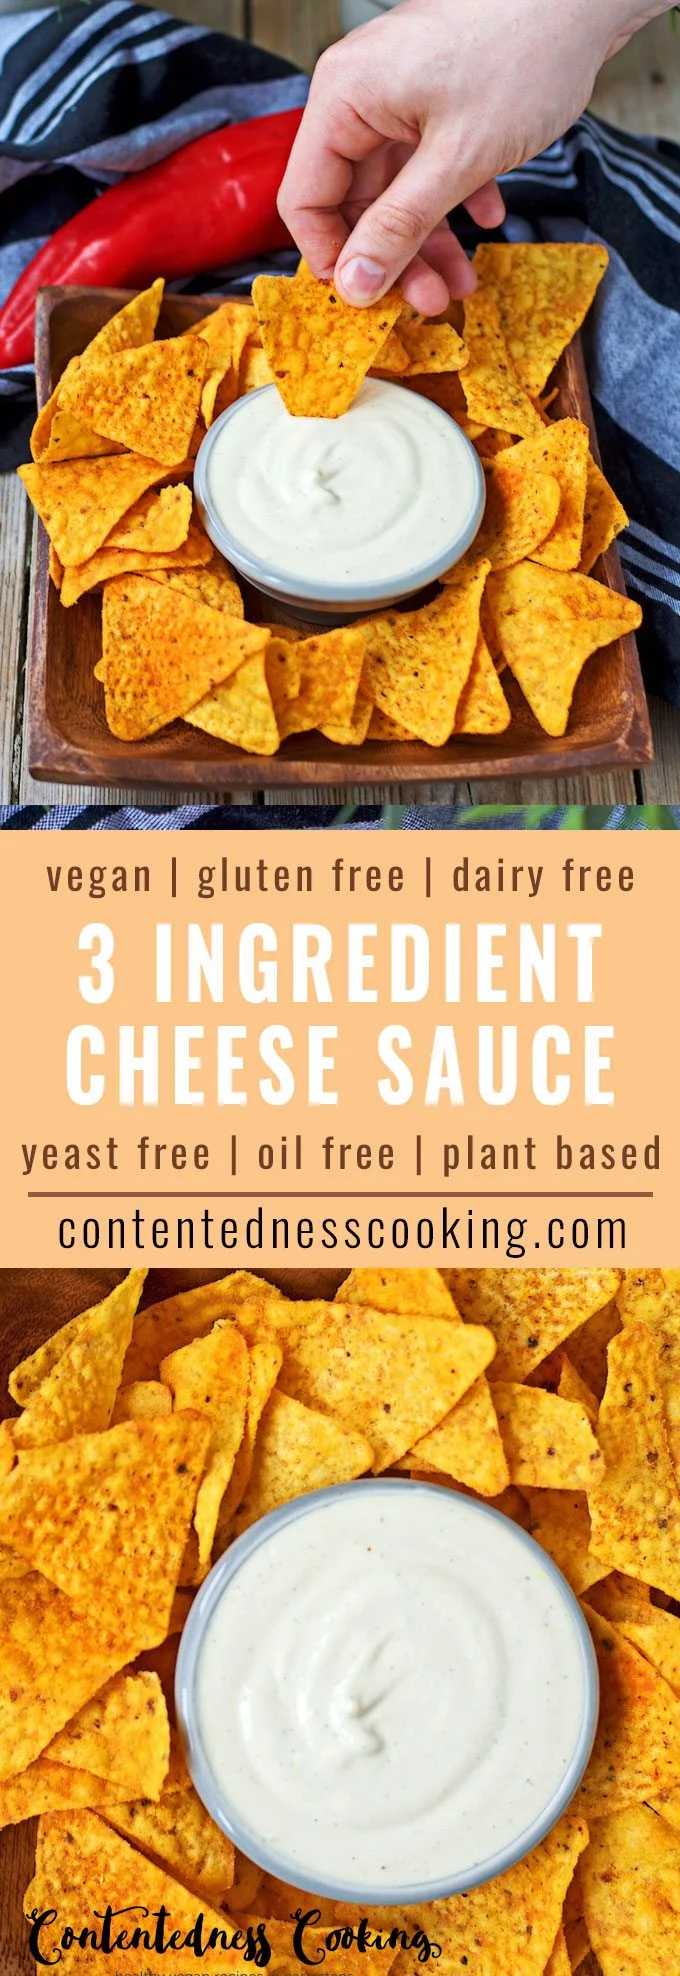 Collage of two pictures of the Vegan Cheese Sauce with recipe title text.